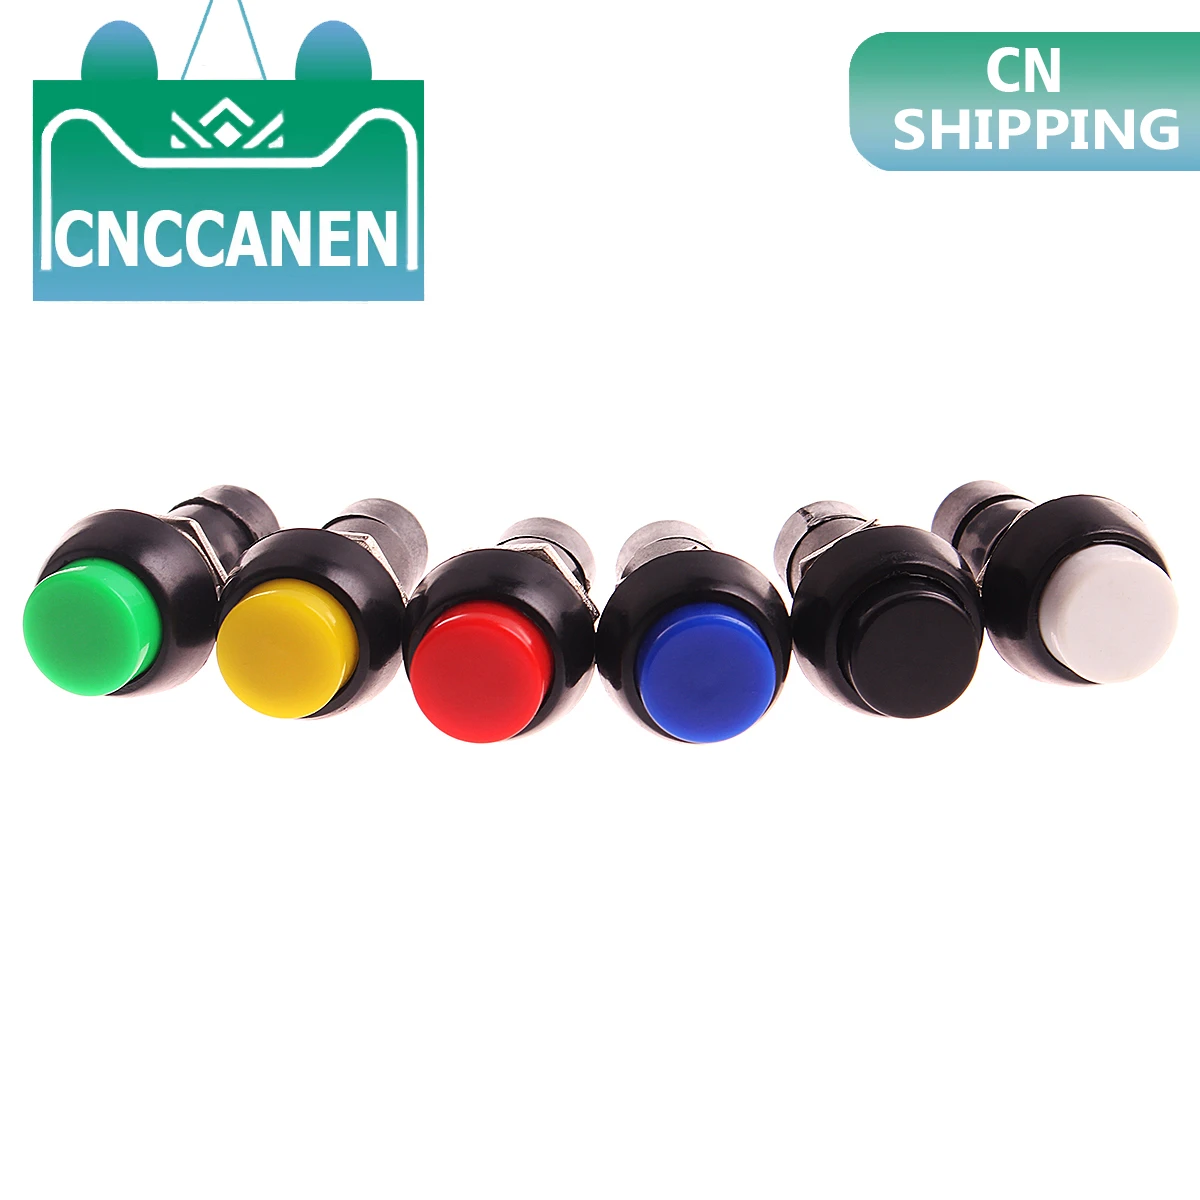 1PC PBS-11A PBS-11B 12mm self-locking Self-Recovery Plastic Push Button Switch momentary 3A 250V AC 2PIN 6Color gold light switch Wall Switches